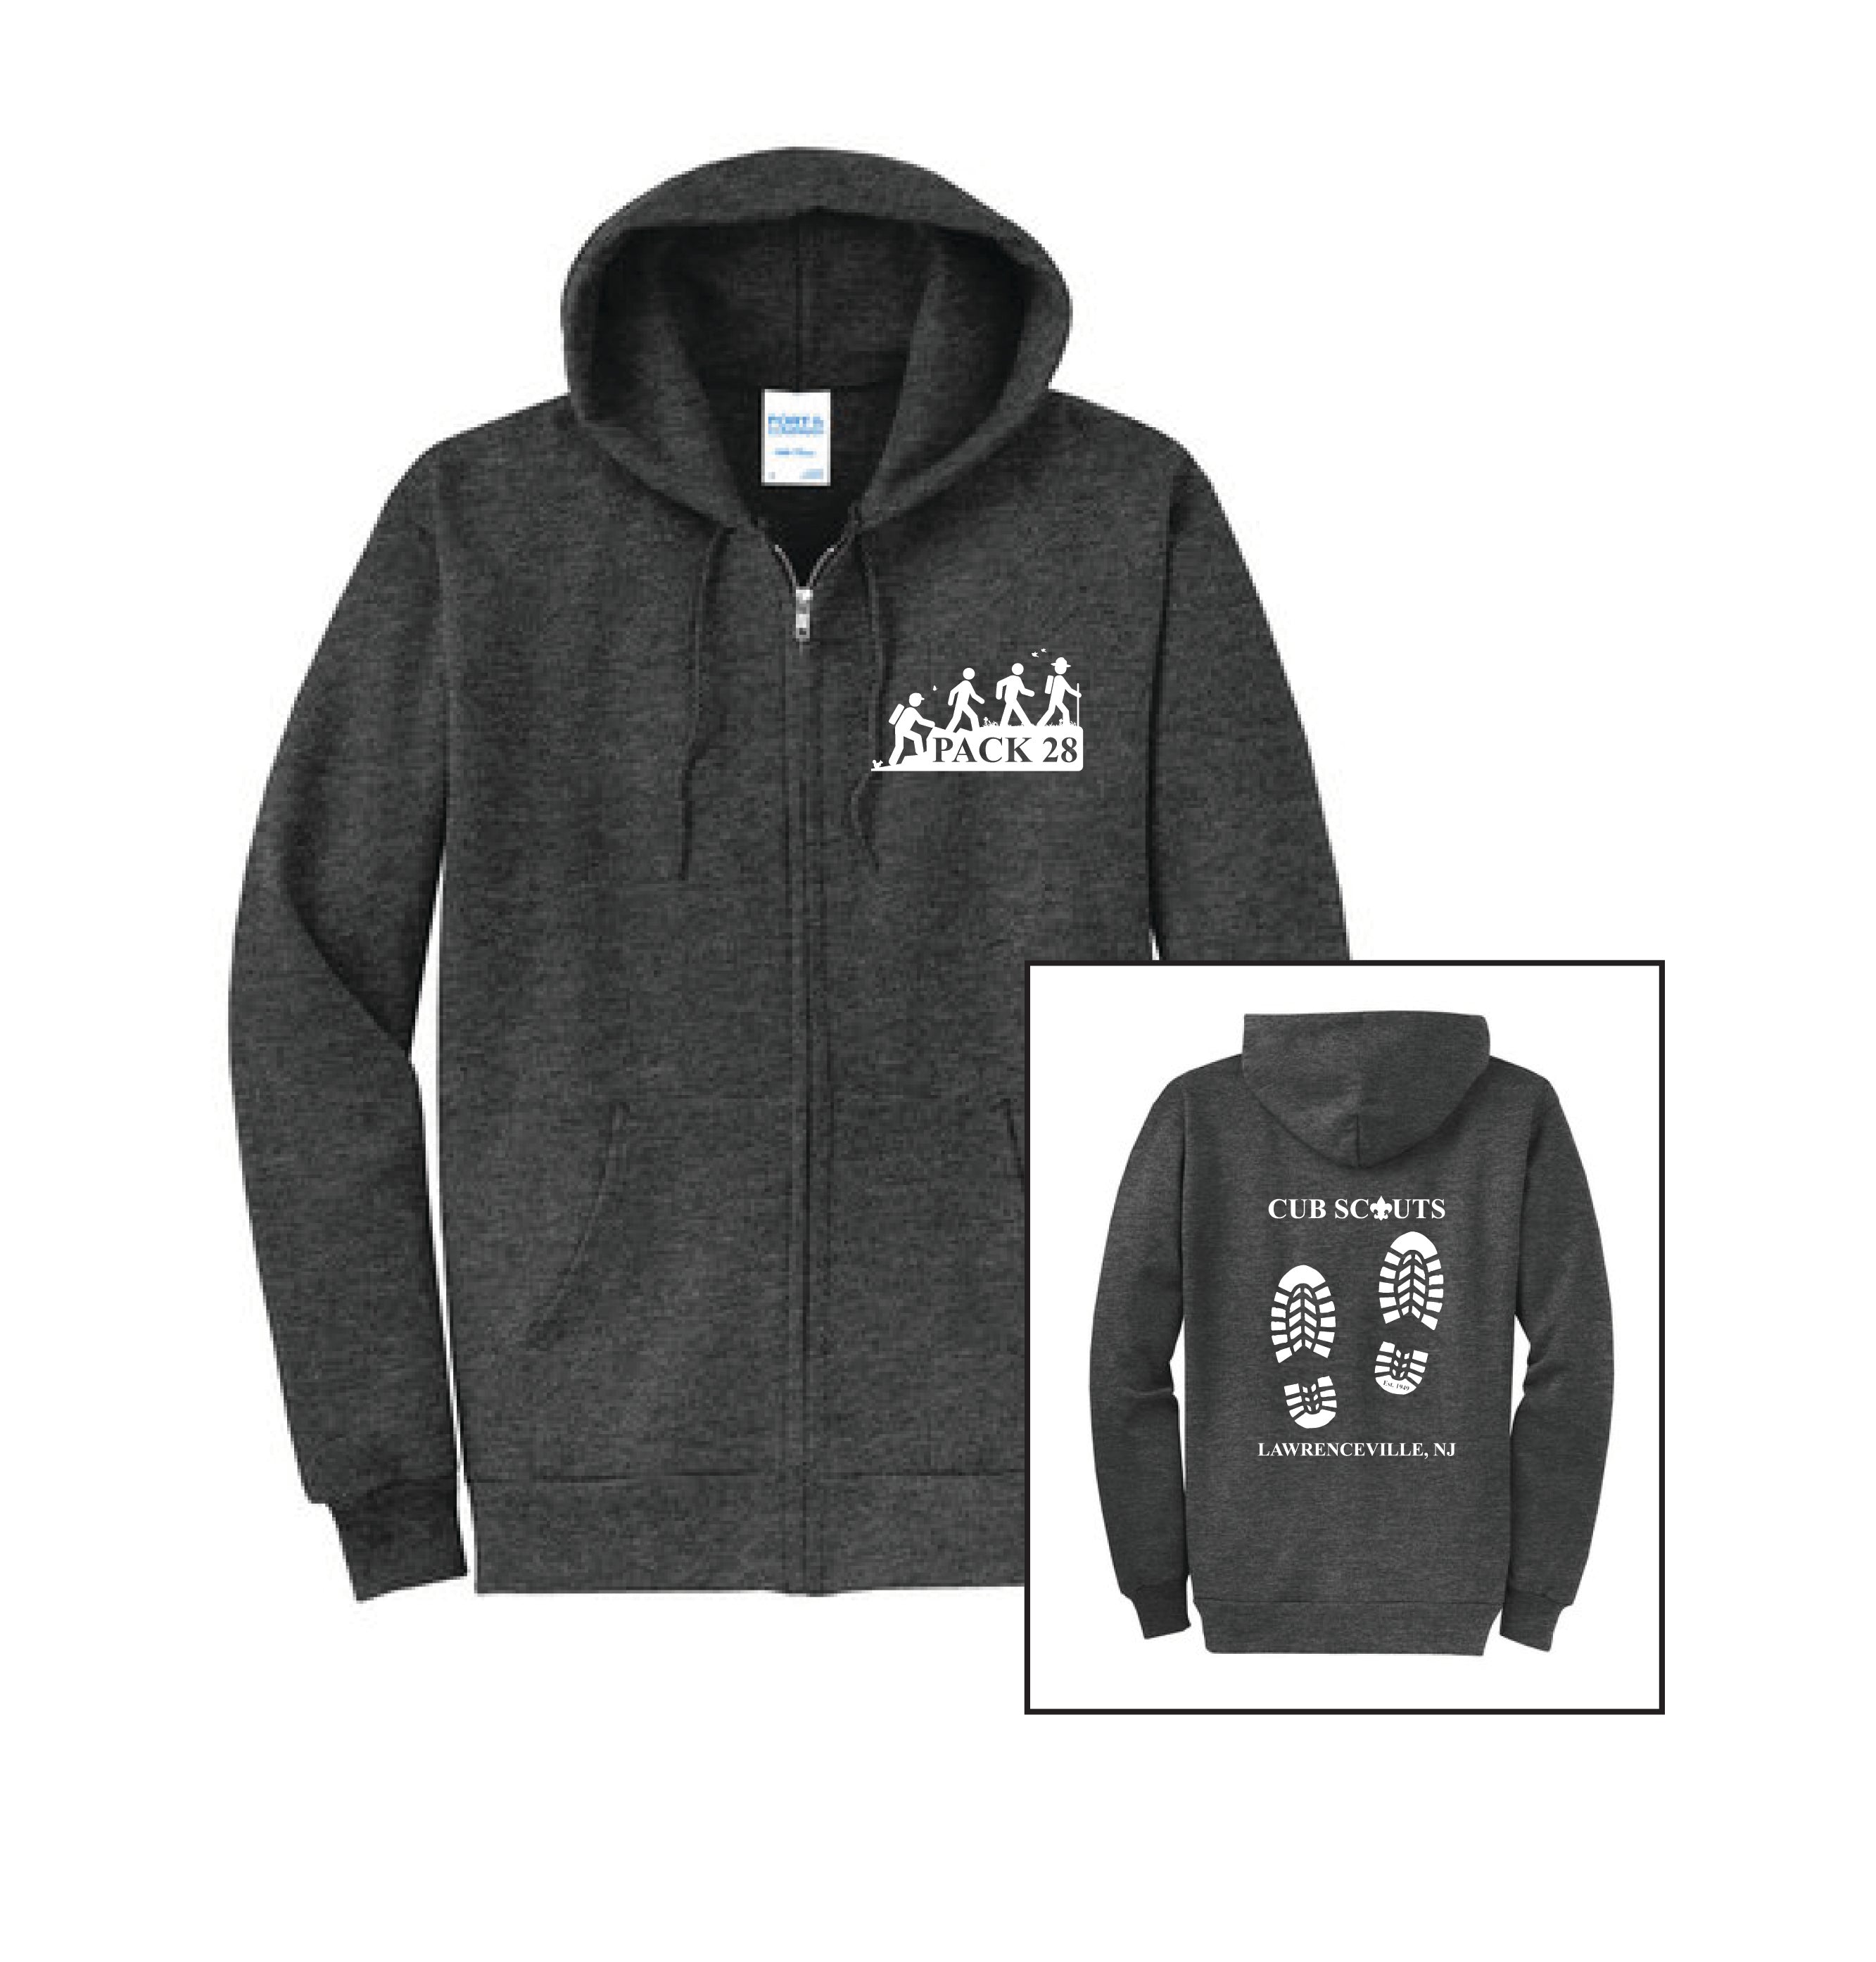 Pack 28 Full Zip Gray Hoodie - Adult Unisex and Youth